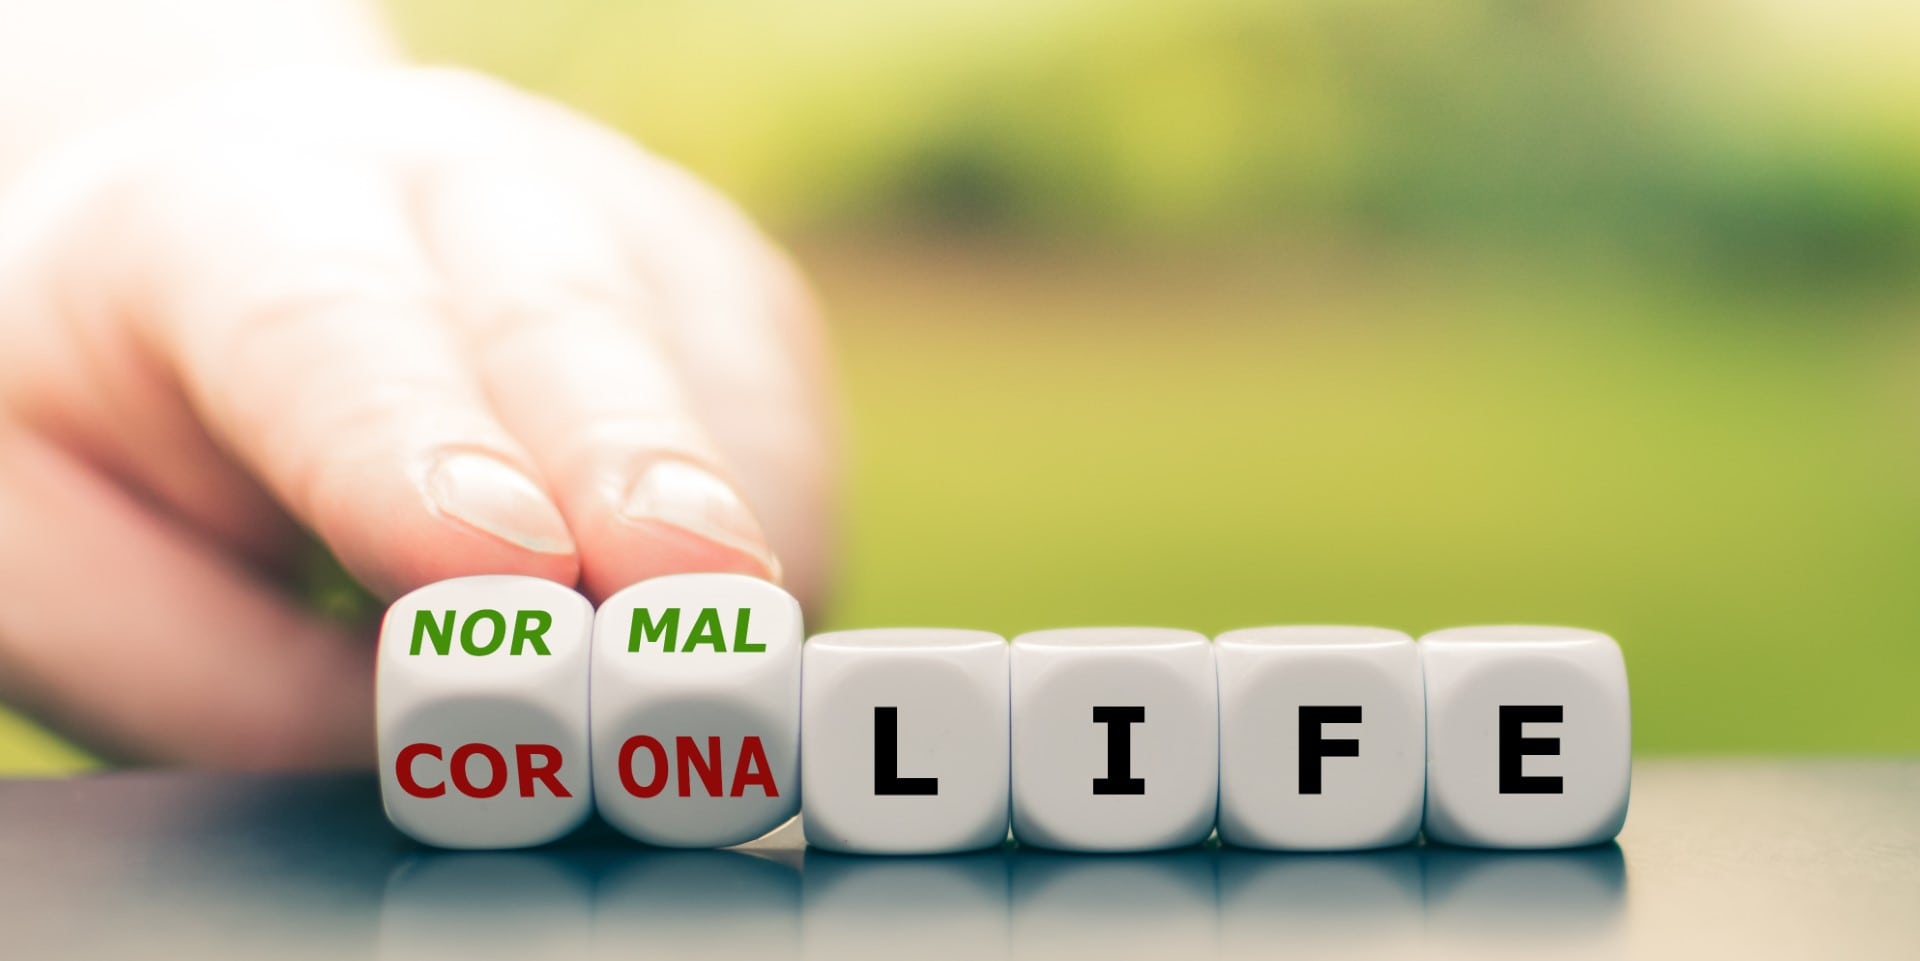 Back to normal. Hand turns dice and changes the expression "corona life" to "normal life".